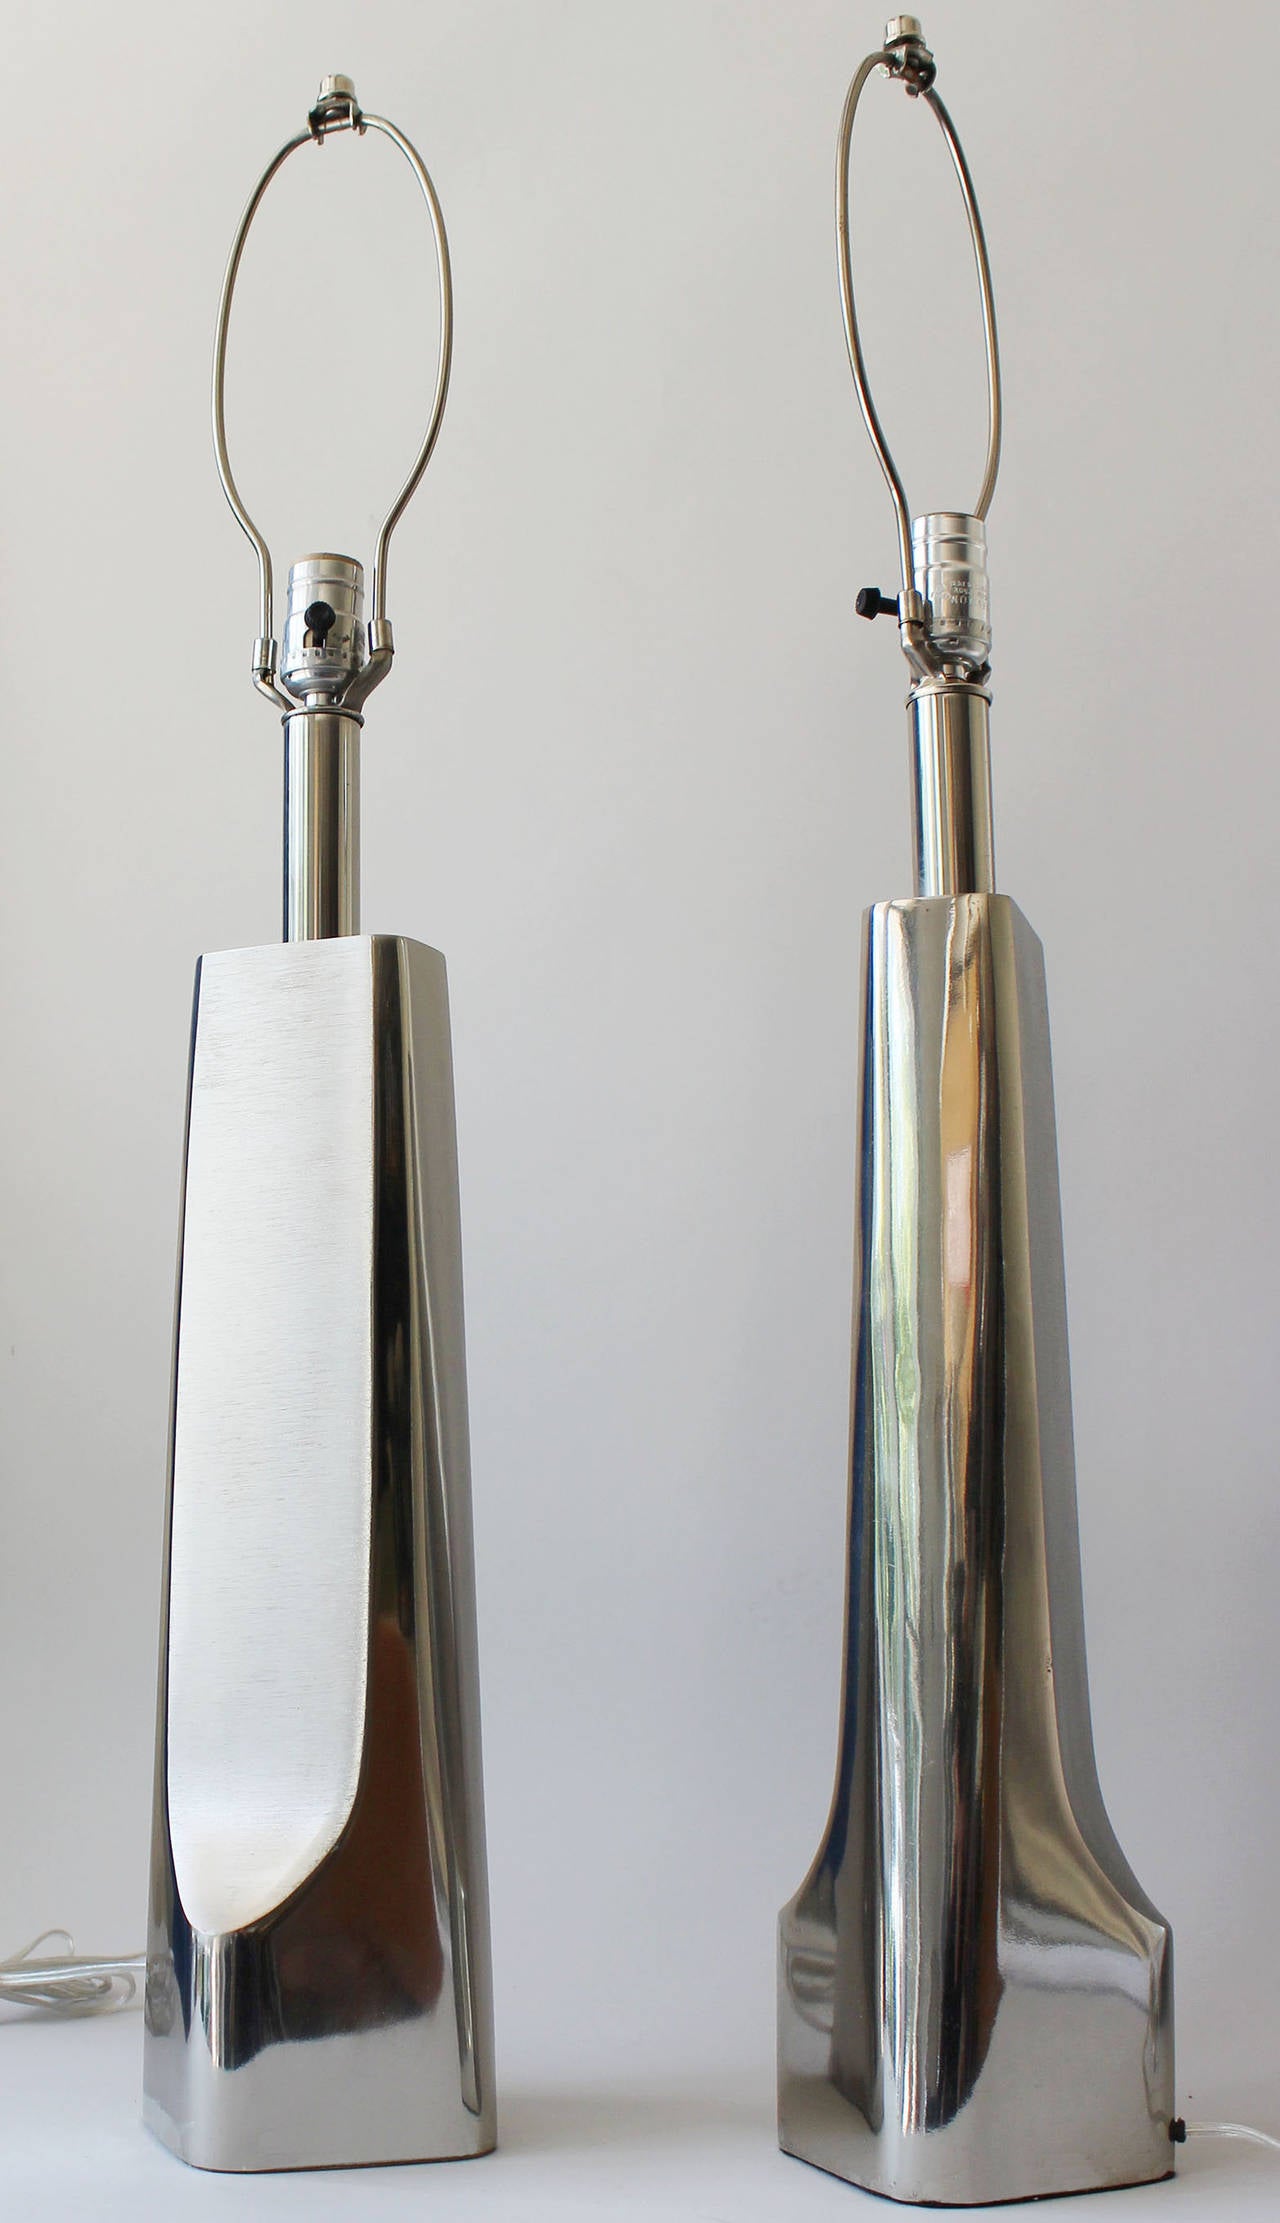 A pair of two-textured chrome Laurel lamps manufactured by Laurel Lamp Co.

Height to bottom of socket 22.5